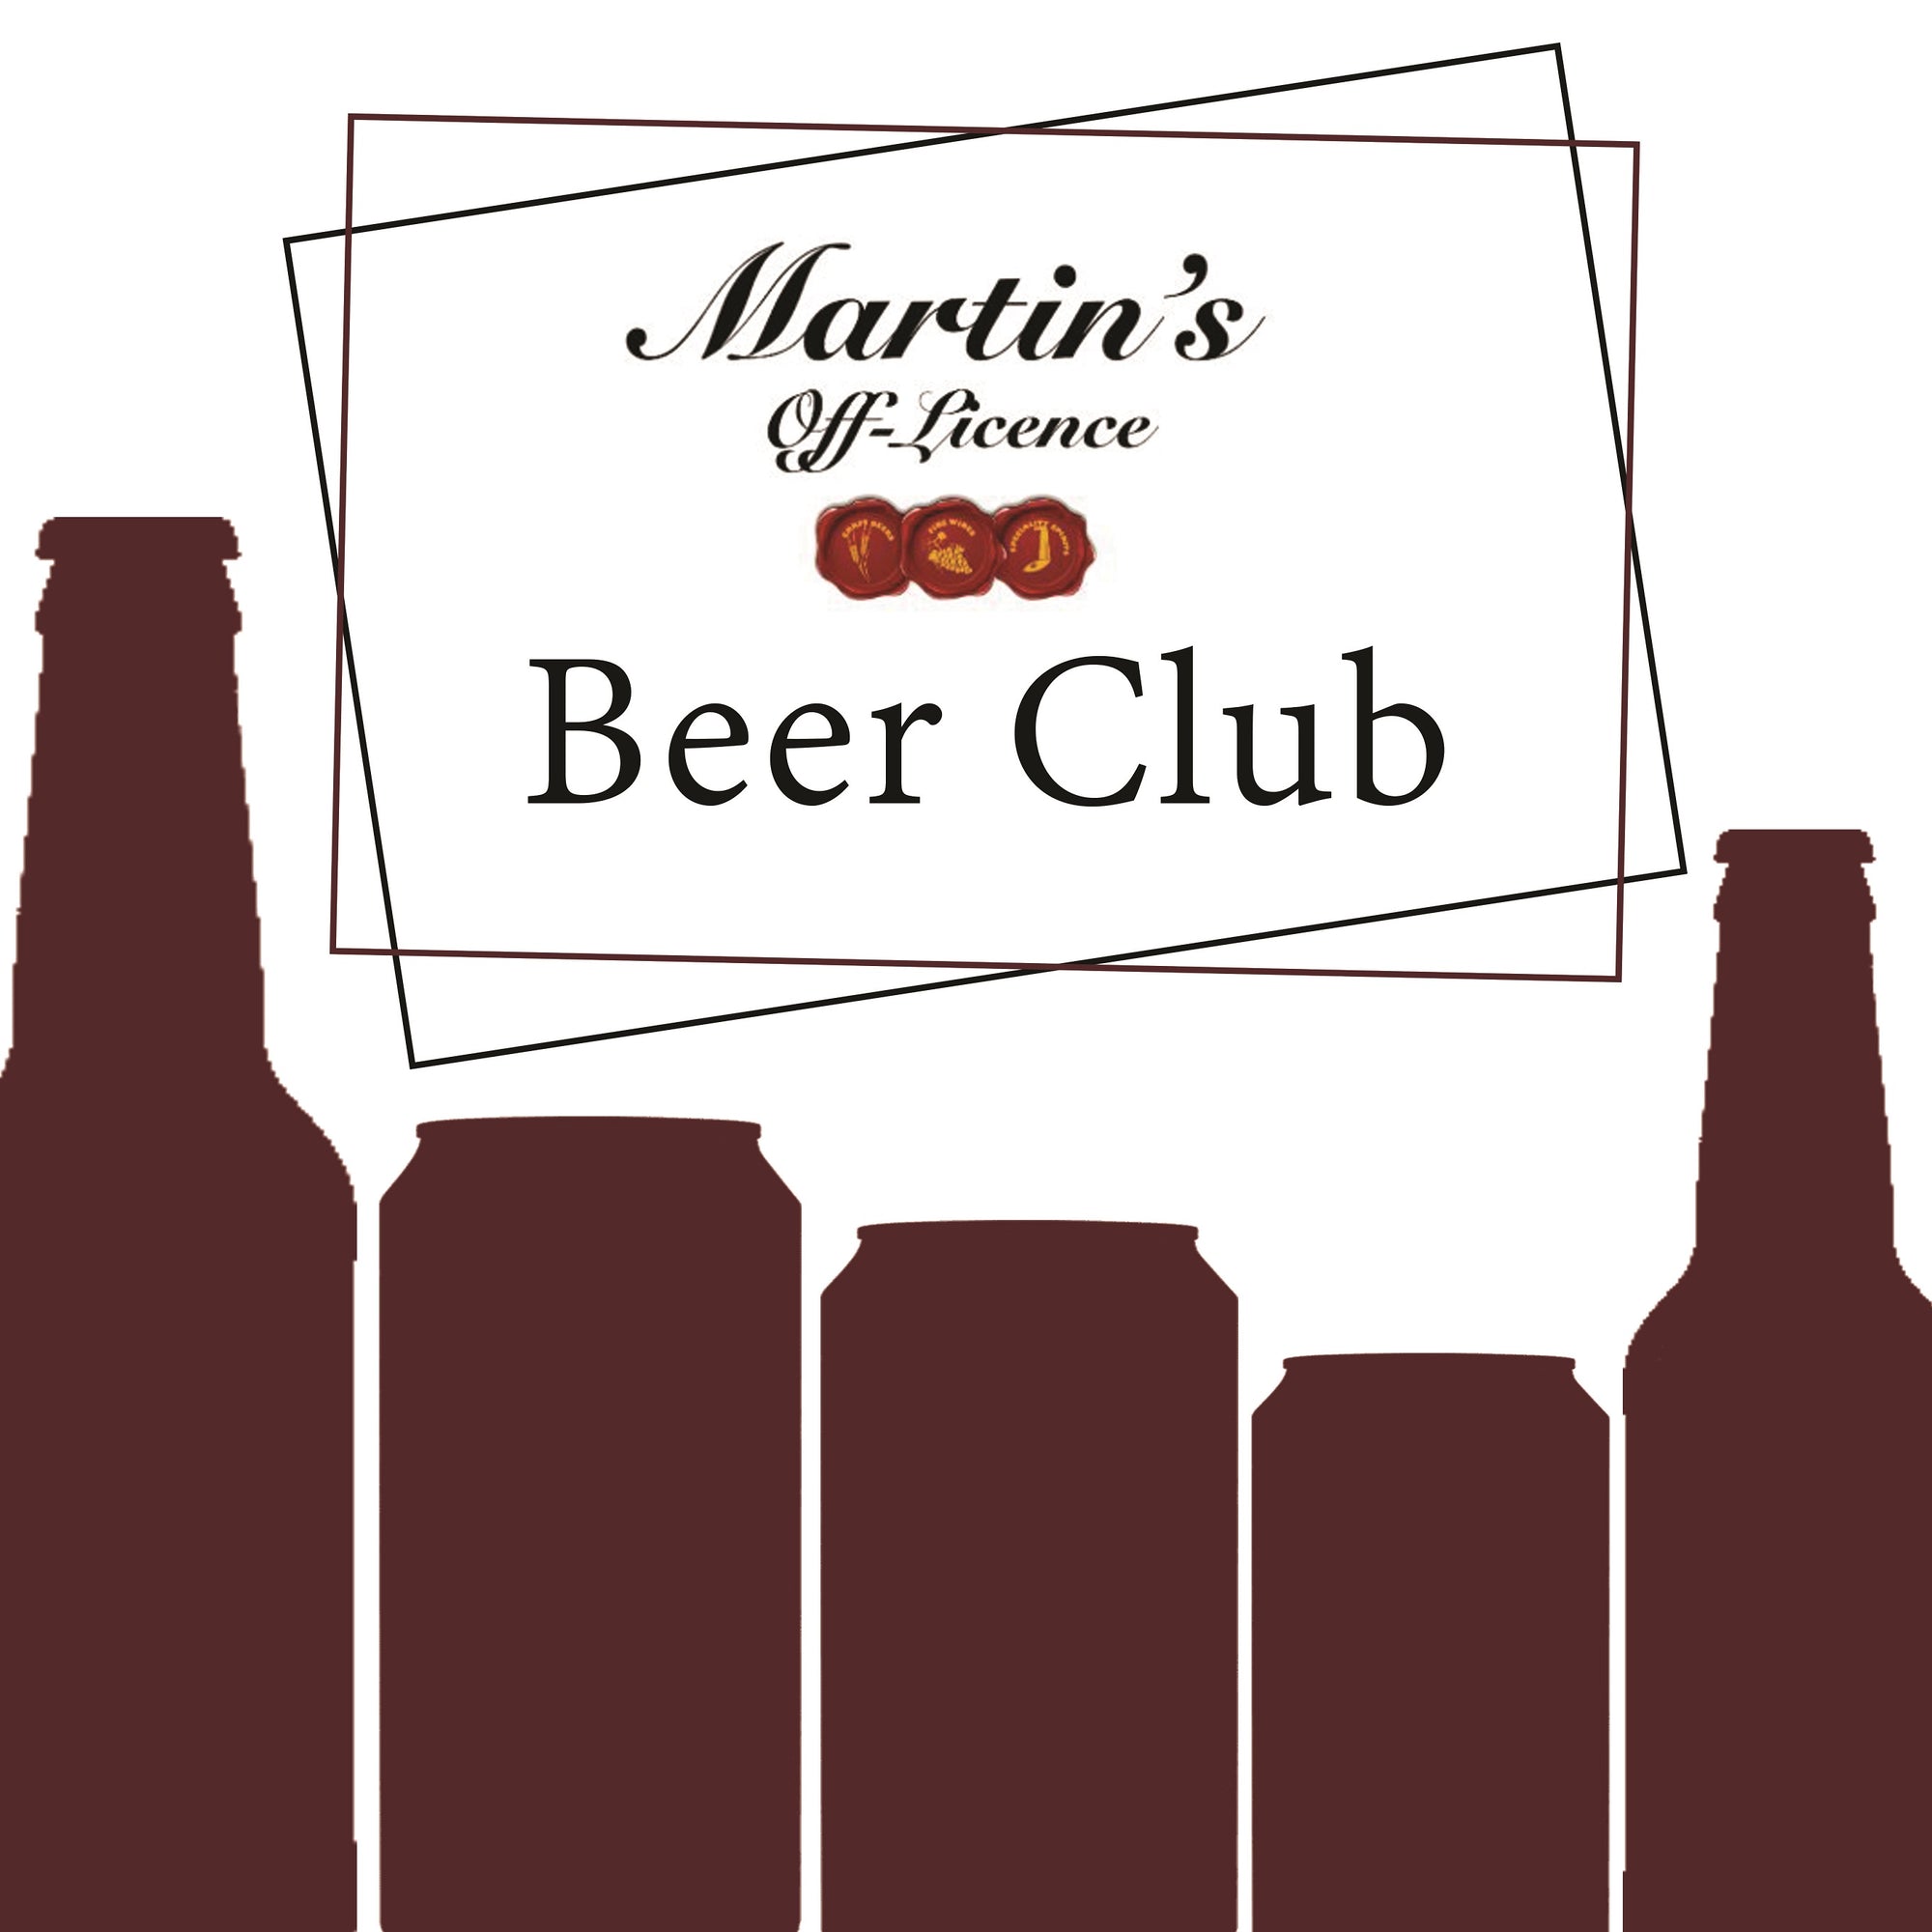 The Lucky Dip Craft Beer Club